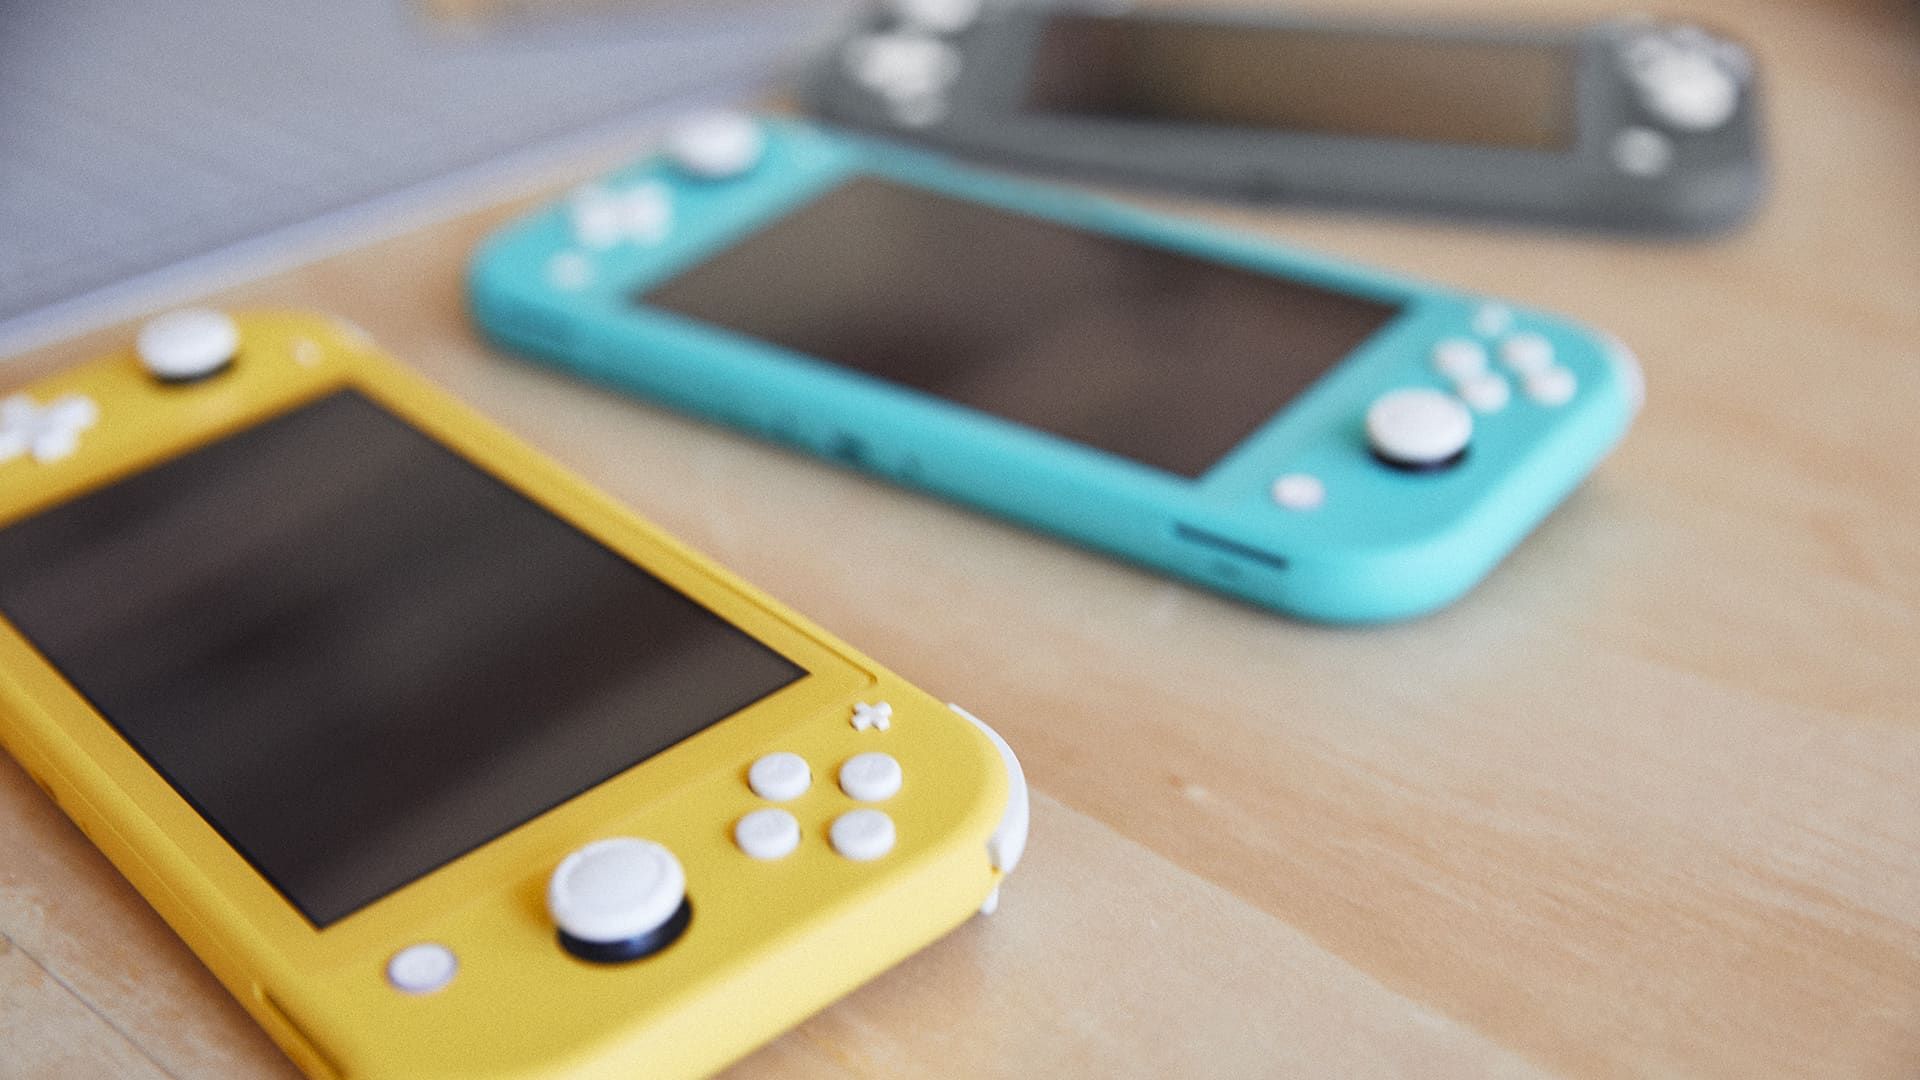 can you play 3ds games on switch lite